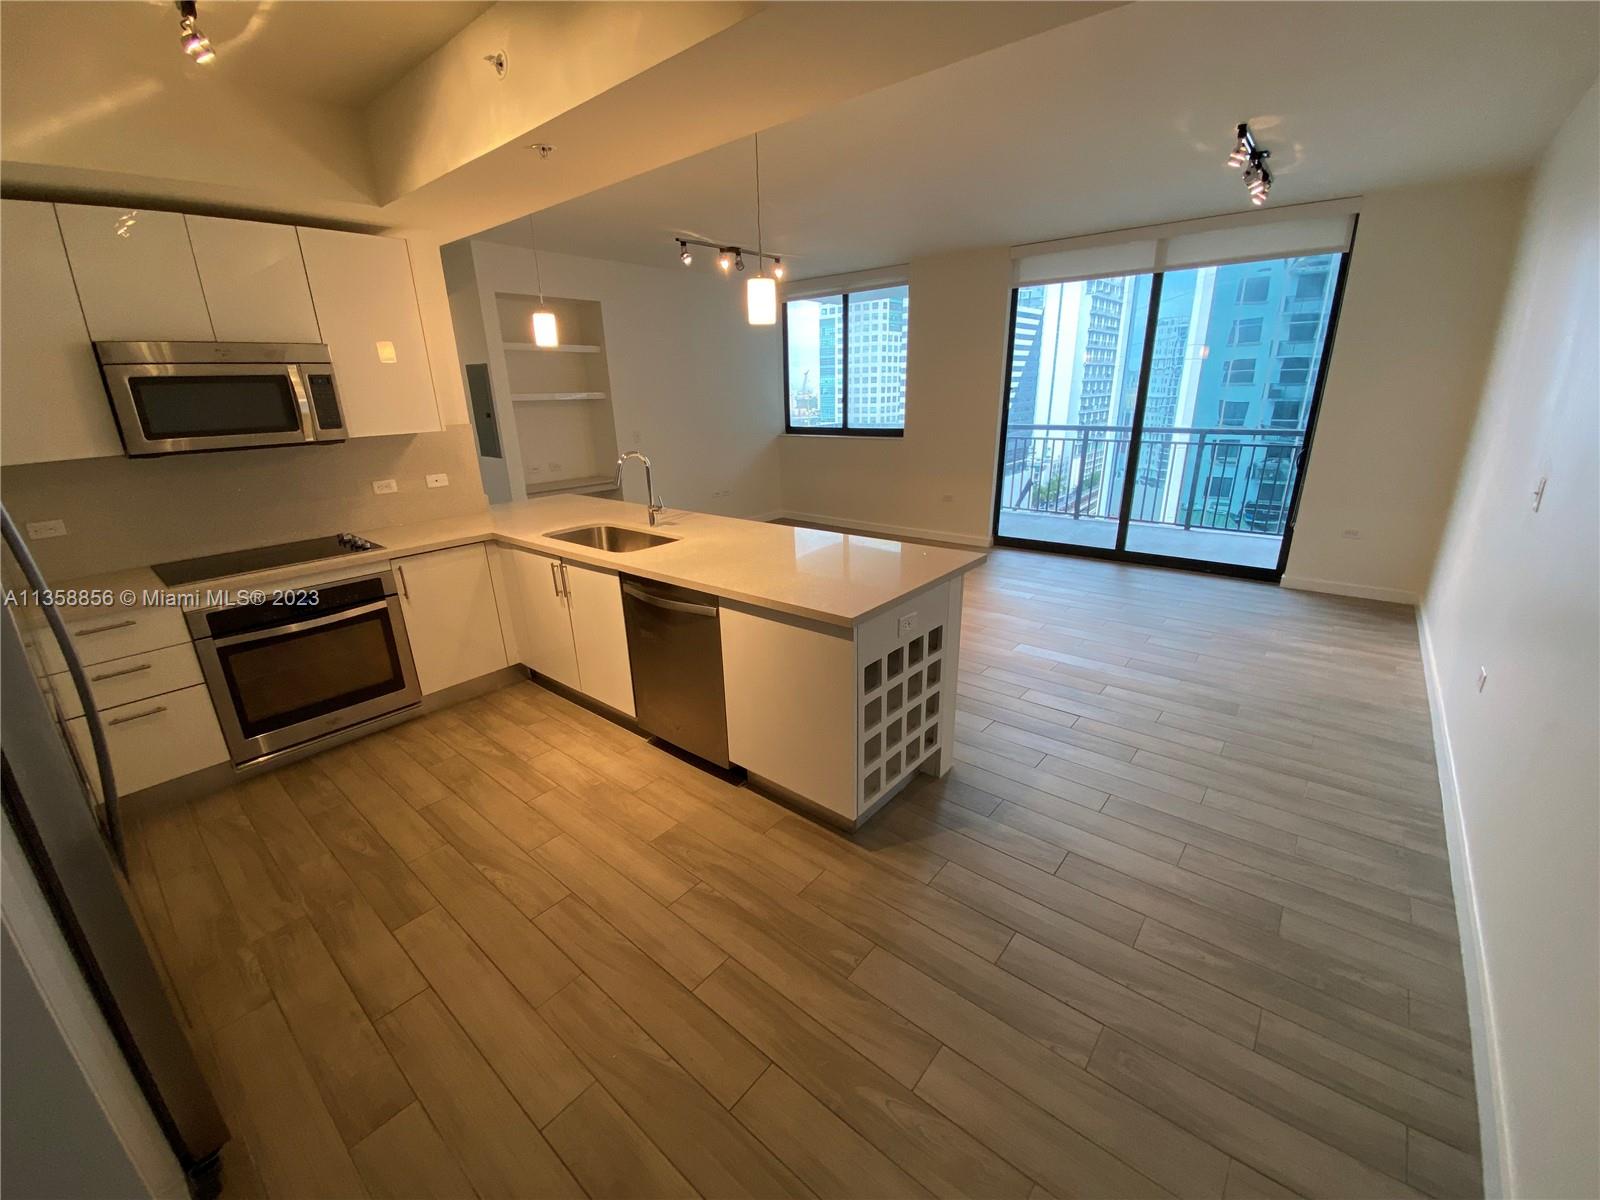 "Nine at Brickell" most desirable location in the heart of Brickell. Ultra modern apartment, tiled throughout, amazing kitchen, corner apartment, full of windows and filled with natural light! Great investment! OK to lease right away, min. 30 days lease and up to 12 leases per year.